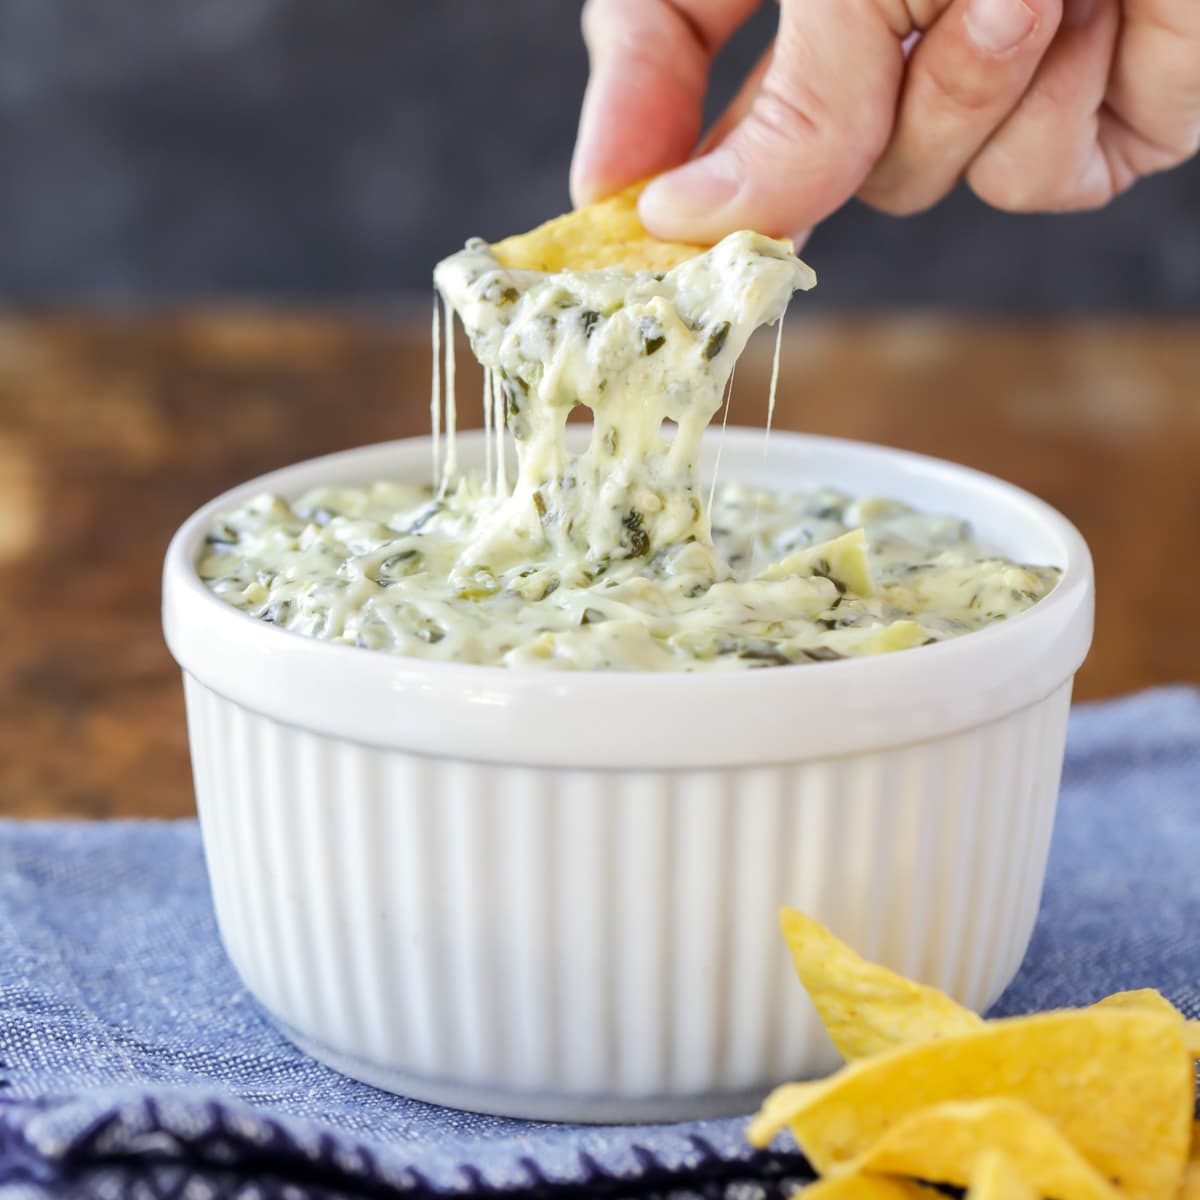 A hand dipping a chip into a bowl of spinach artichoke dip.